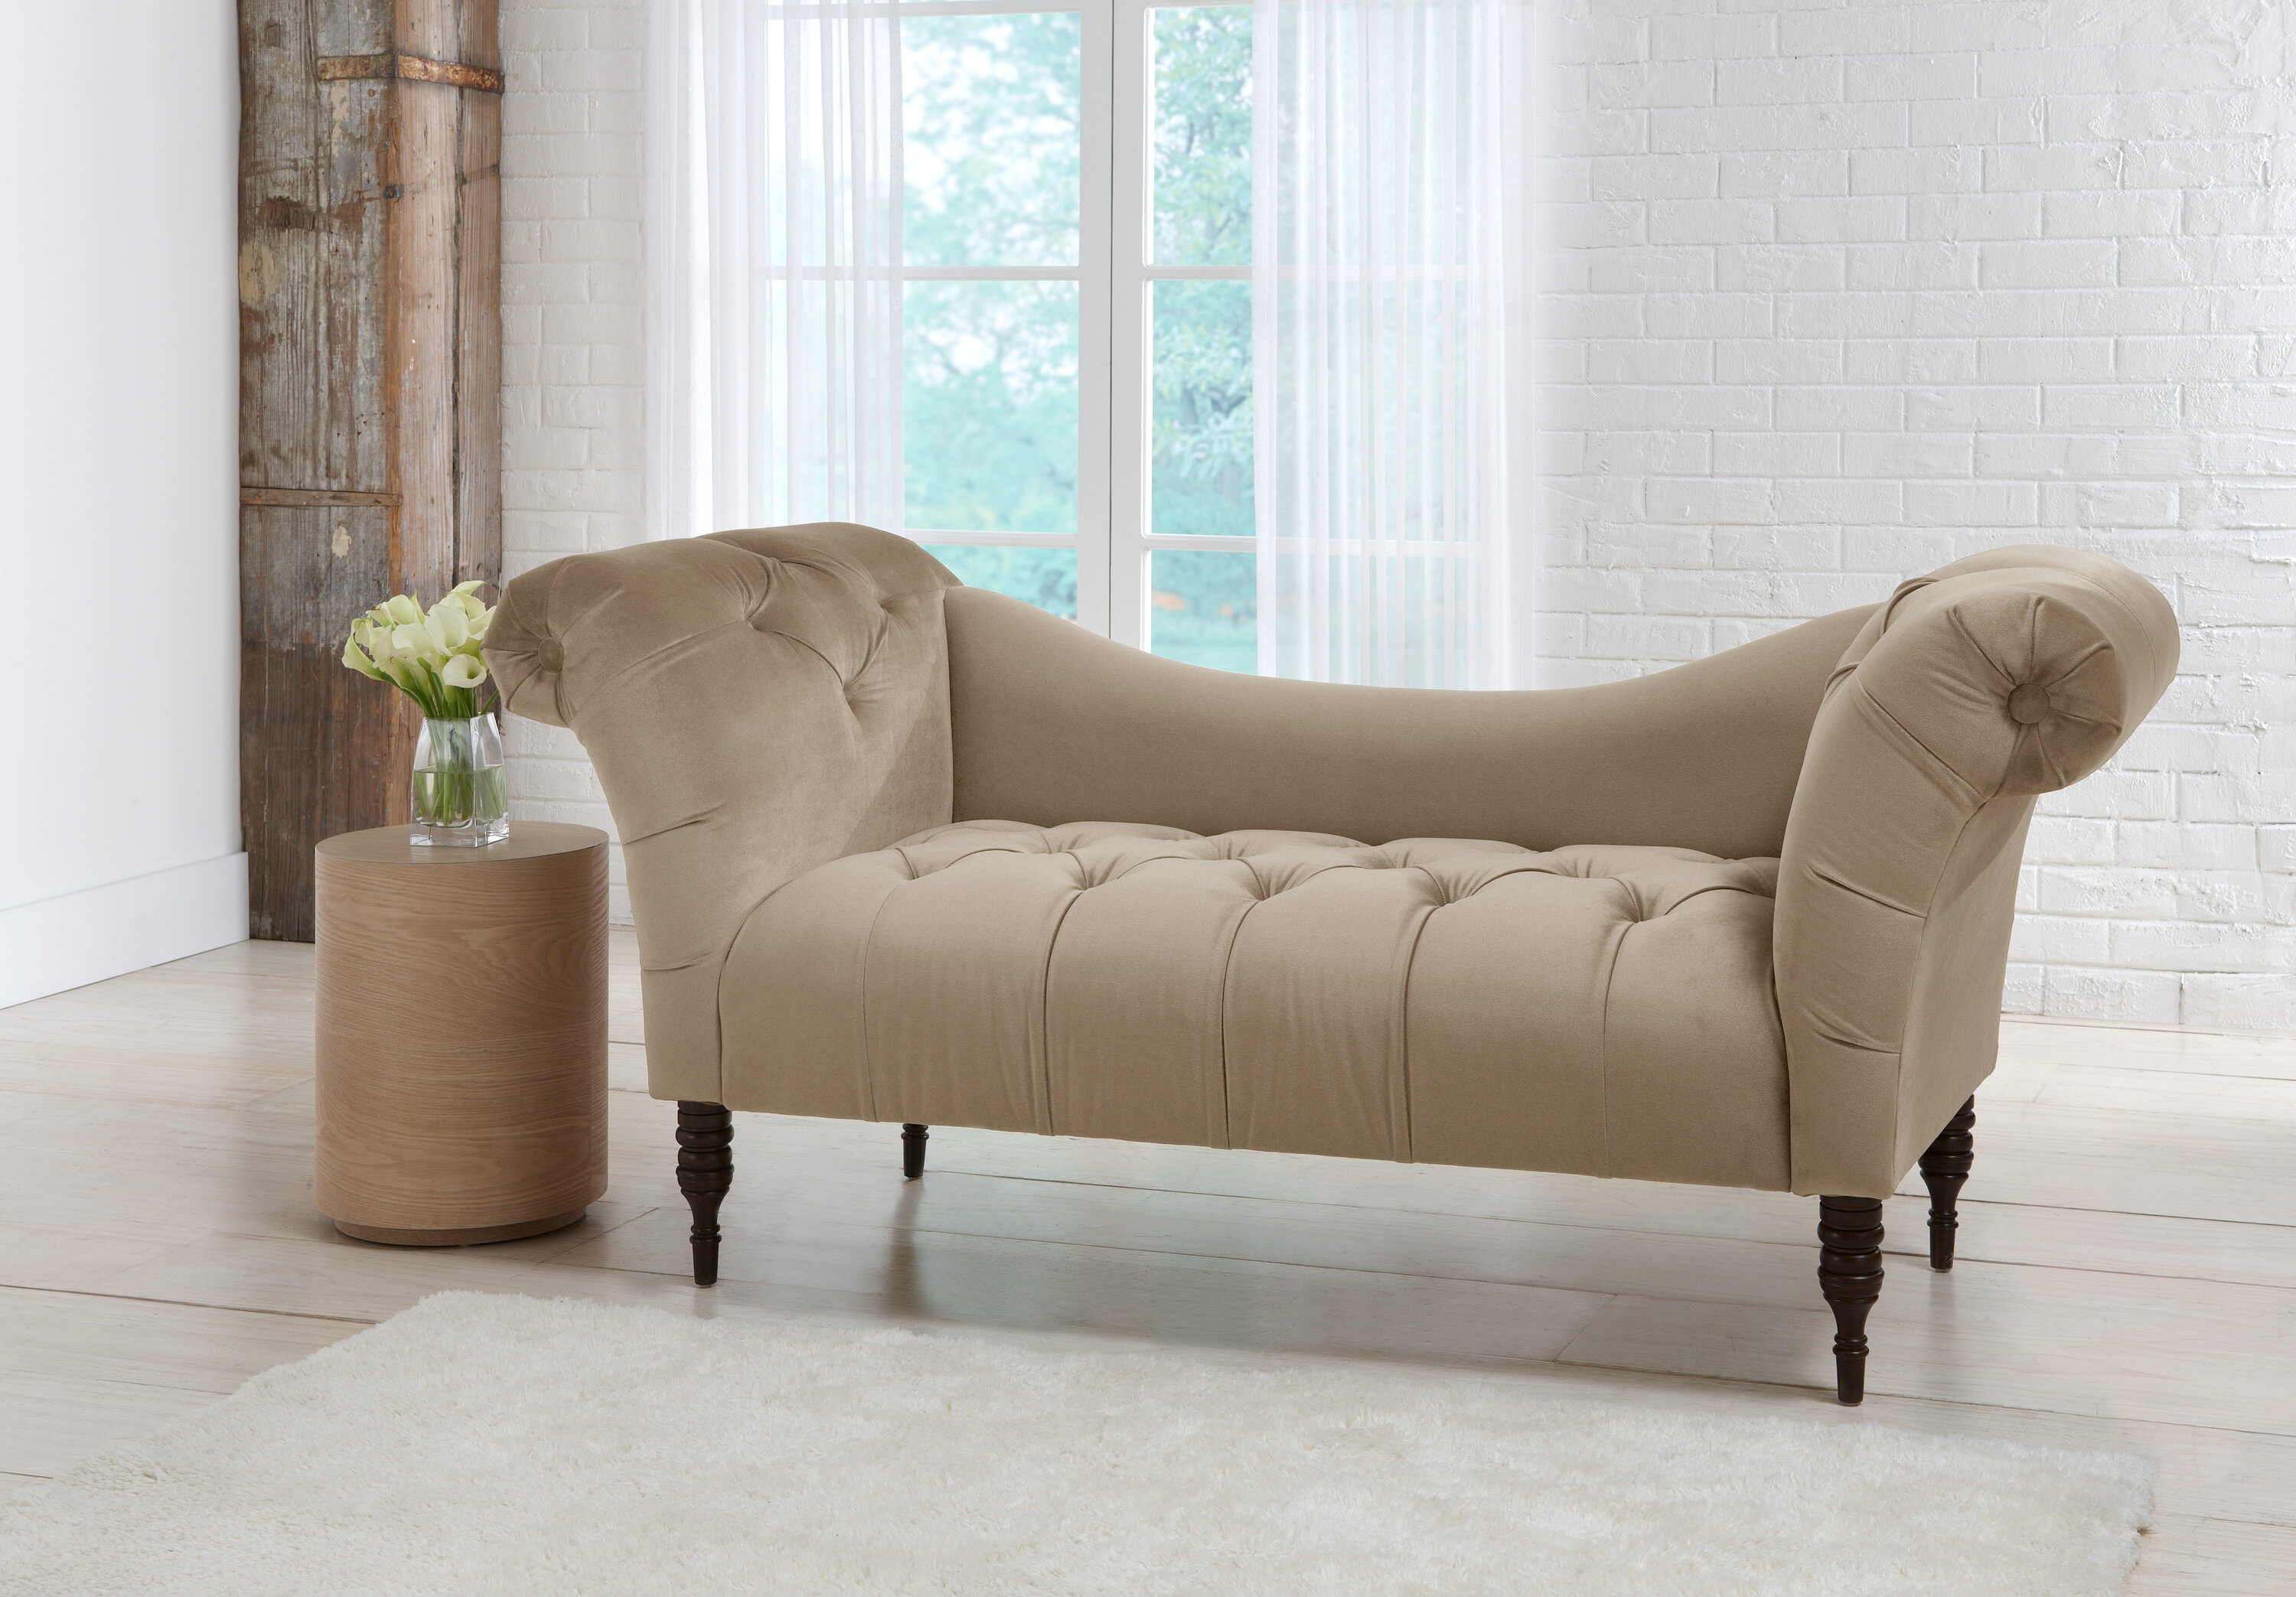 Dendy Upholstered Chaise Lounge